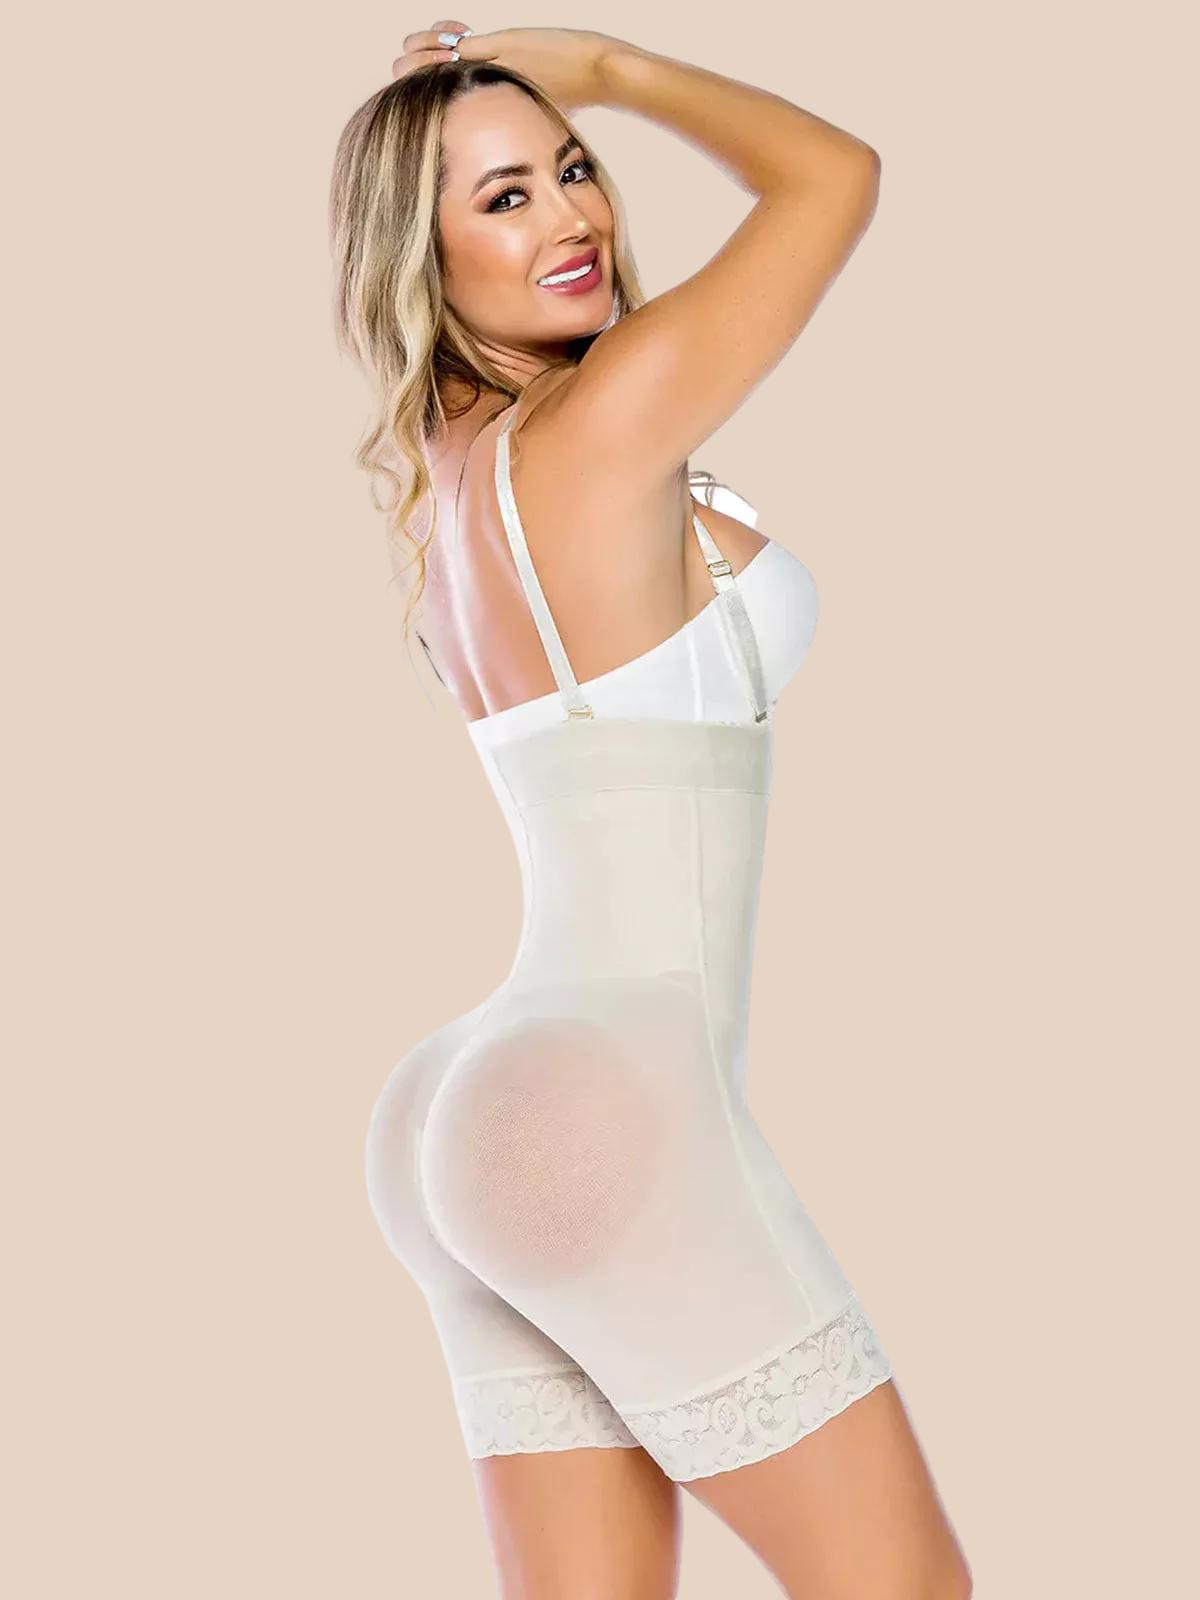 Premium Colombian Shapewear-Seamless Shaper Butt-Lift High Panty Thigh  Cover-Faja Mujer Reductora Colombiana 